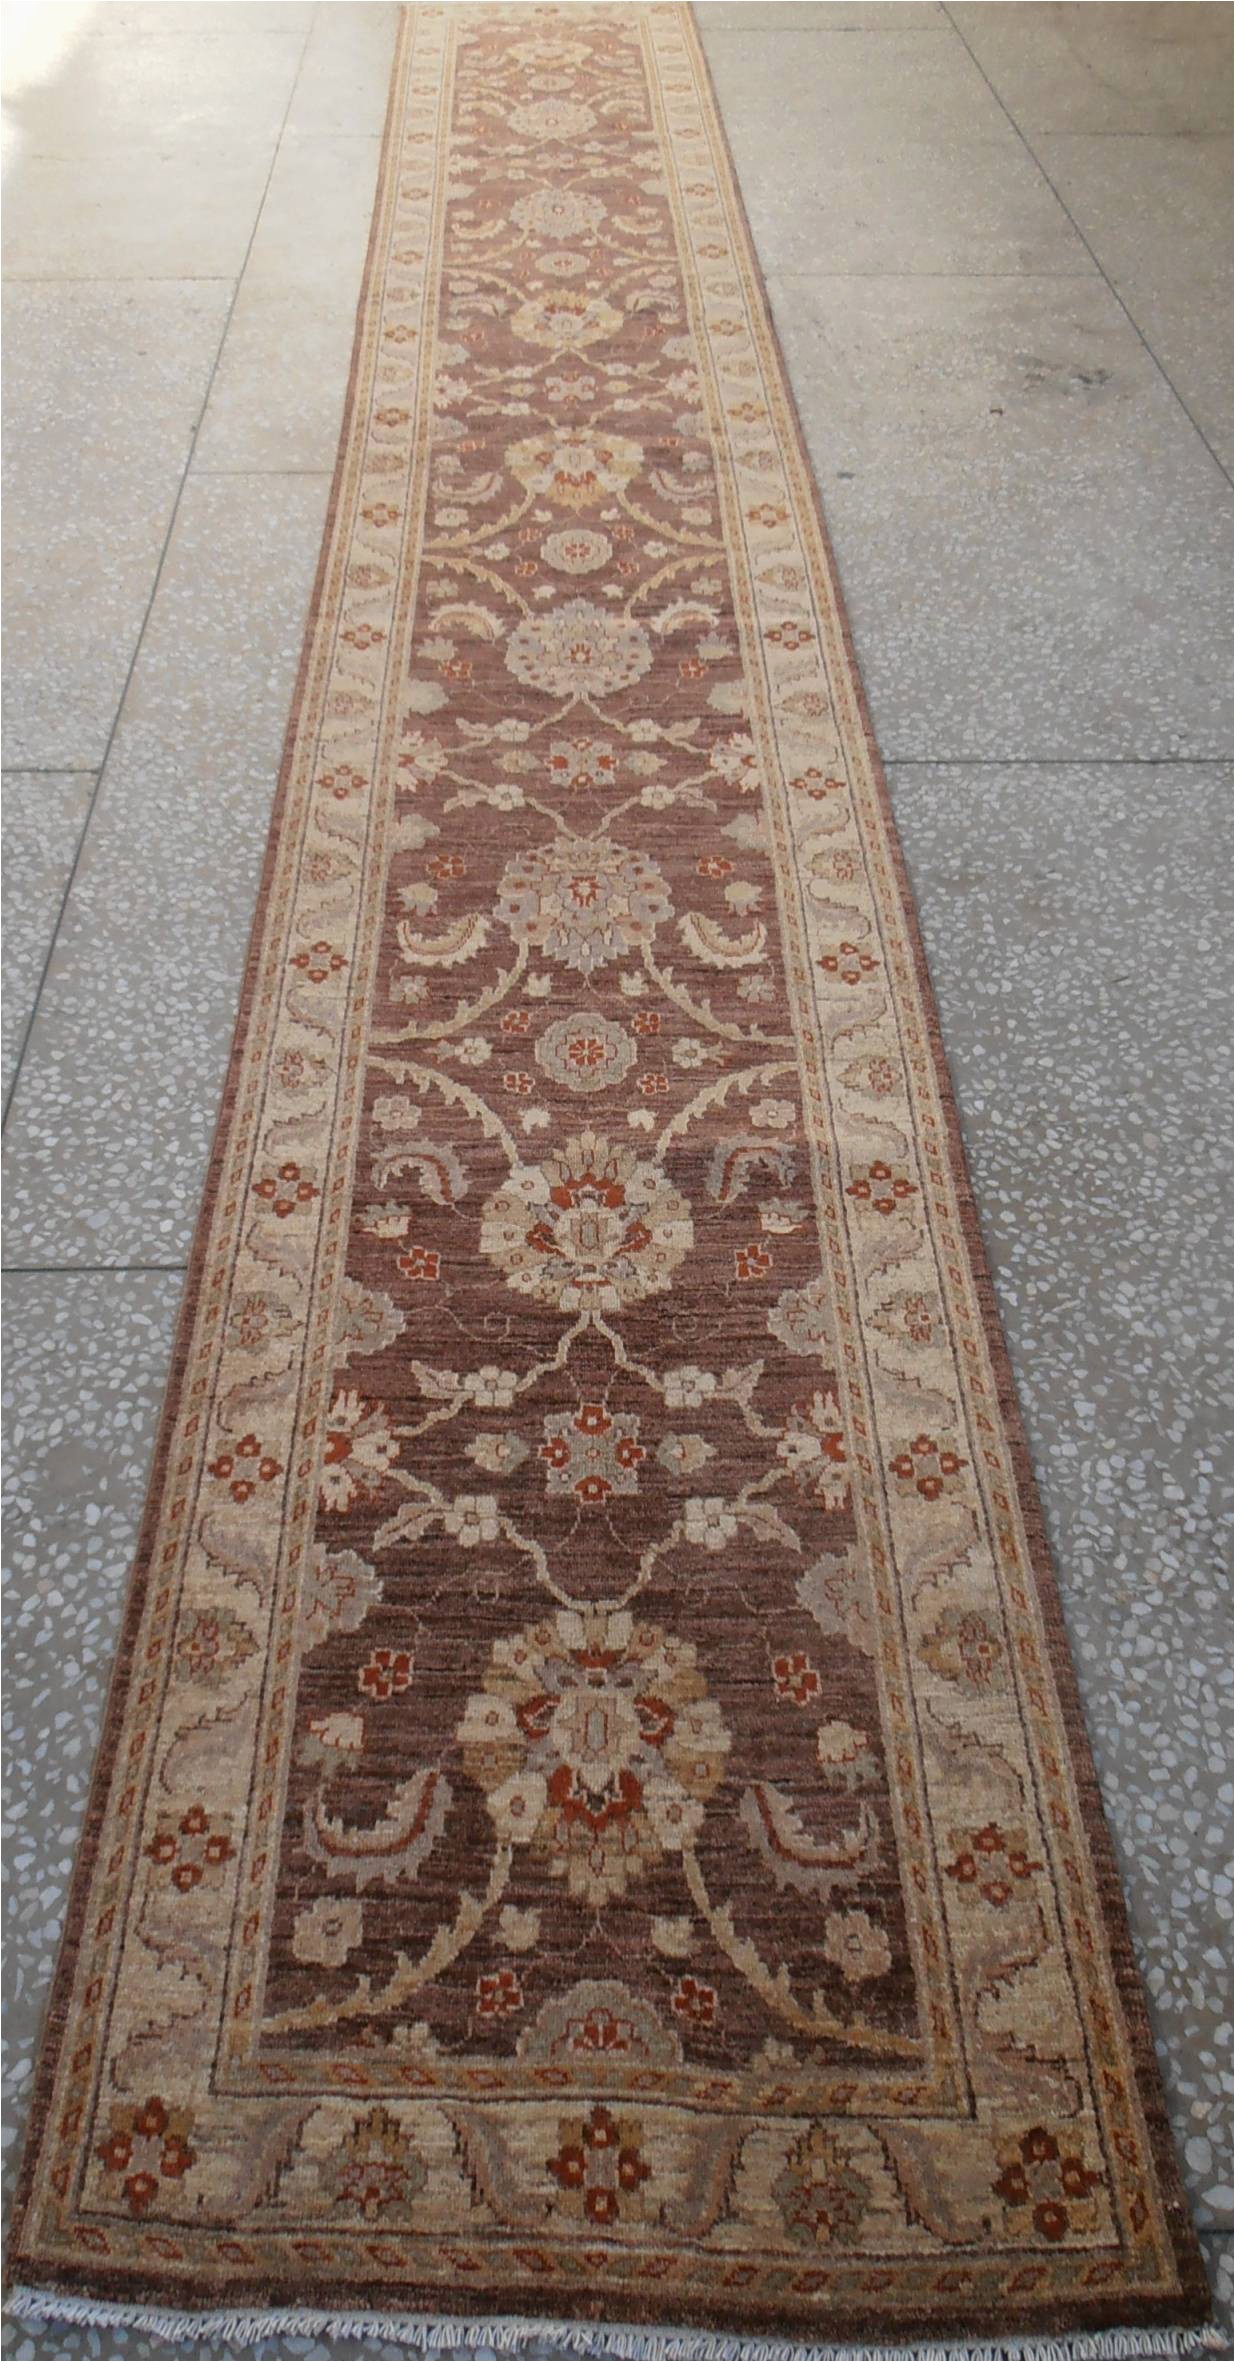 20 by 20 area Rug Chobi Brown Runner Hand Knotted 2 9" X 19 4" area Rug 700